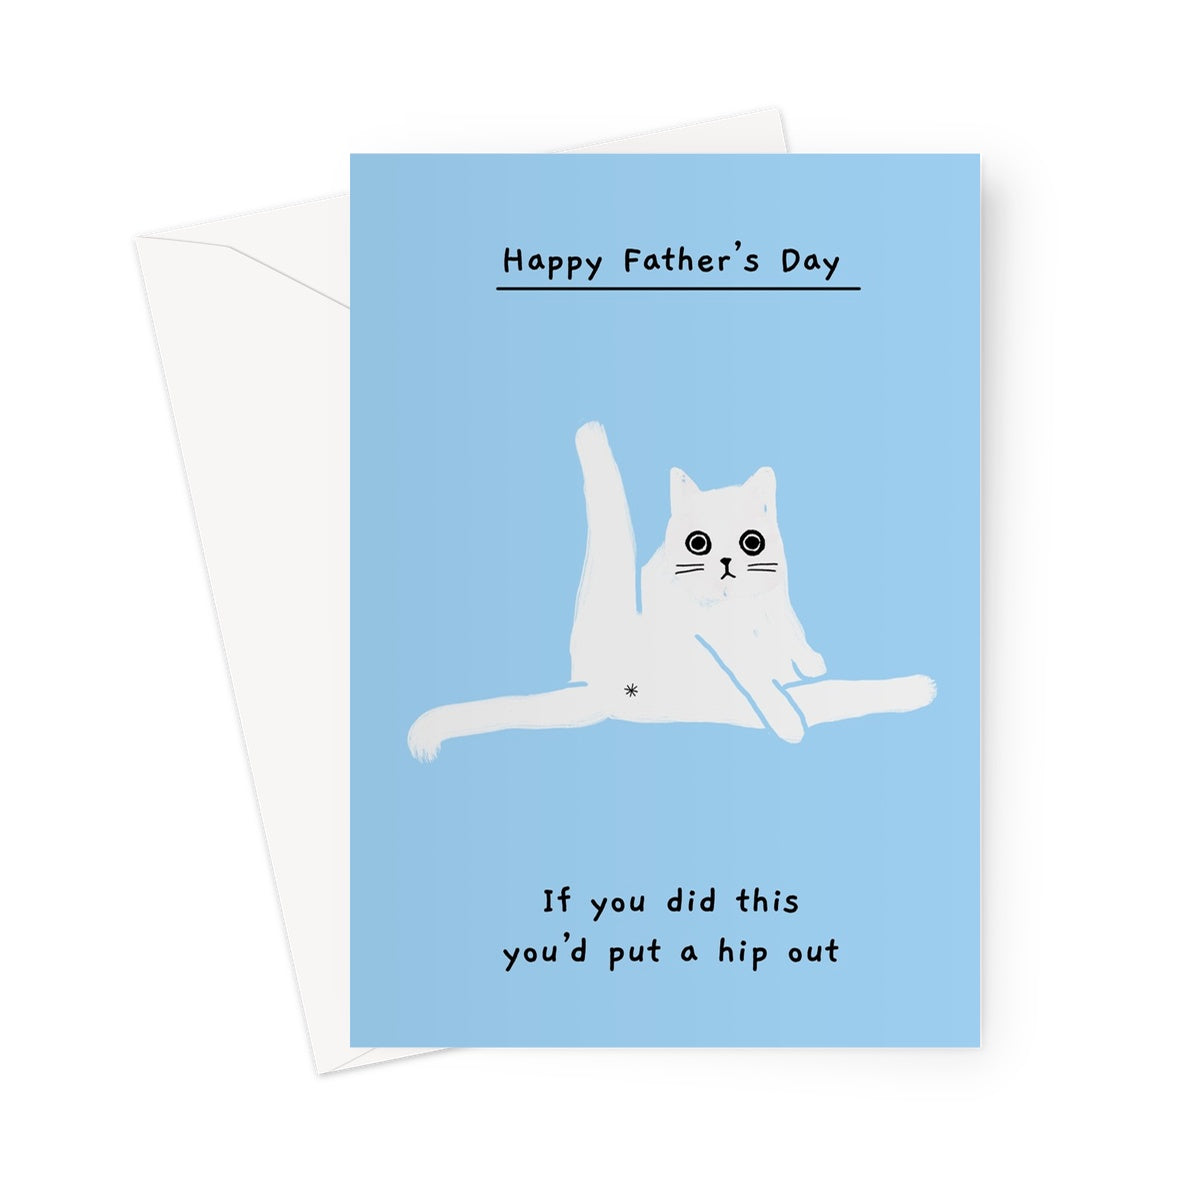 Ken the cat Father's Day card - If you did this you'd put a hip out - Ken sitting  with one leg up on blue background